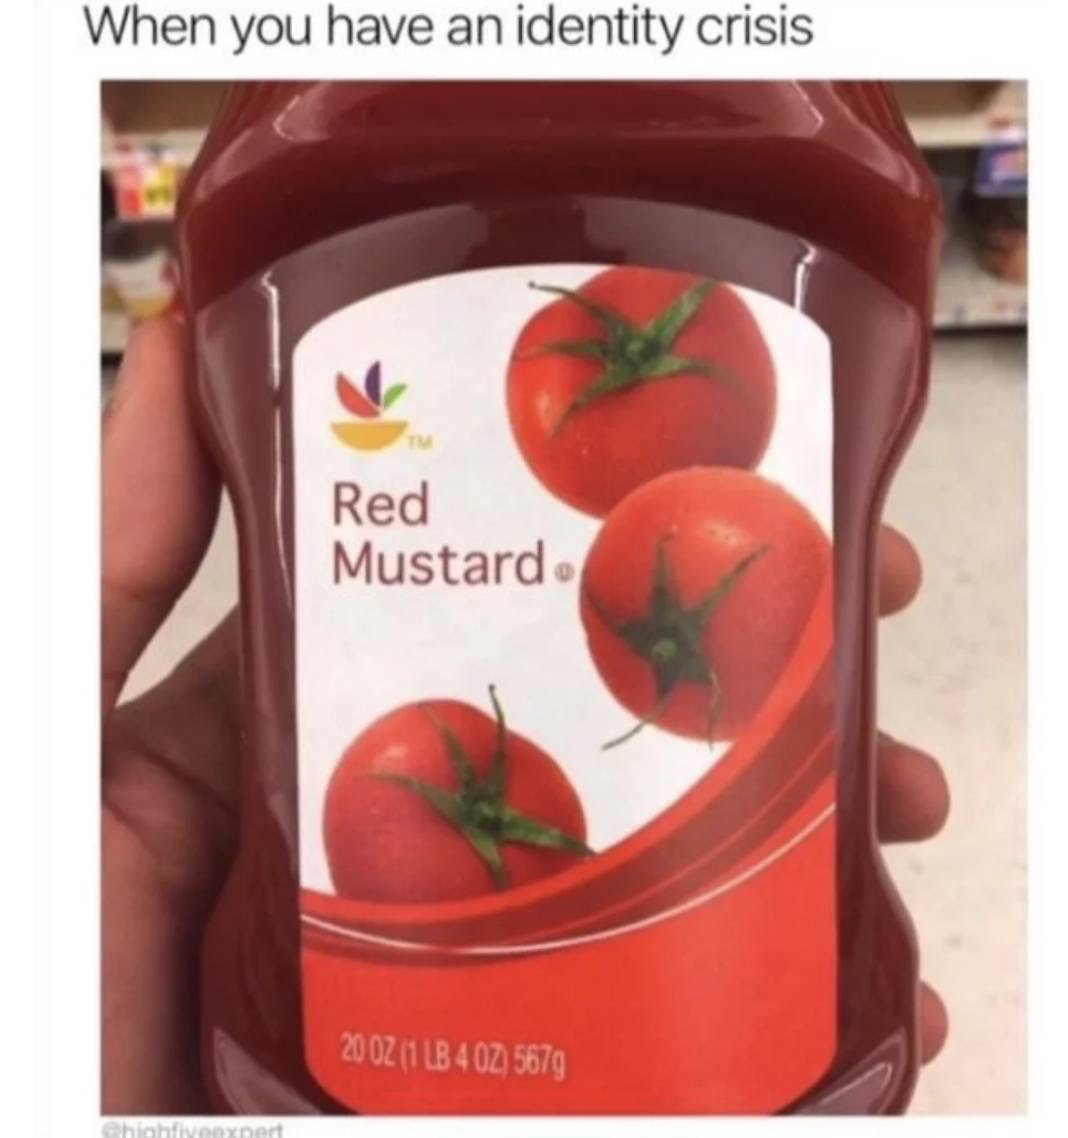 humpday meme - red mustard ketchup - When you have an identity crisis Red Mustard 20 Oz 1 Lb 402, 5679 Tv